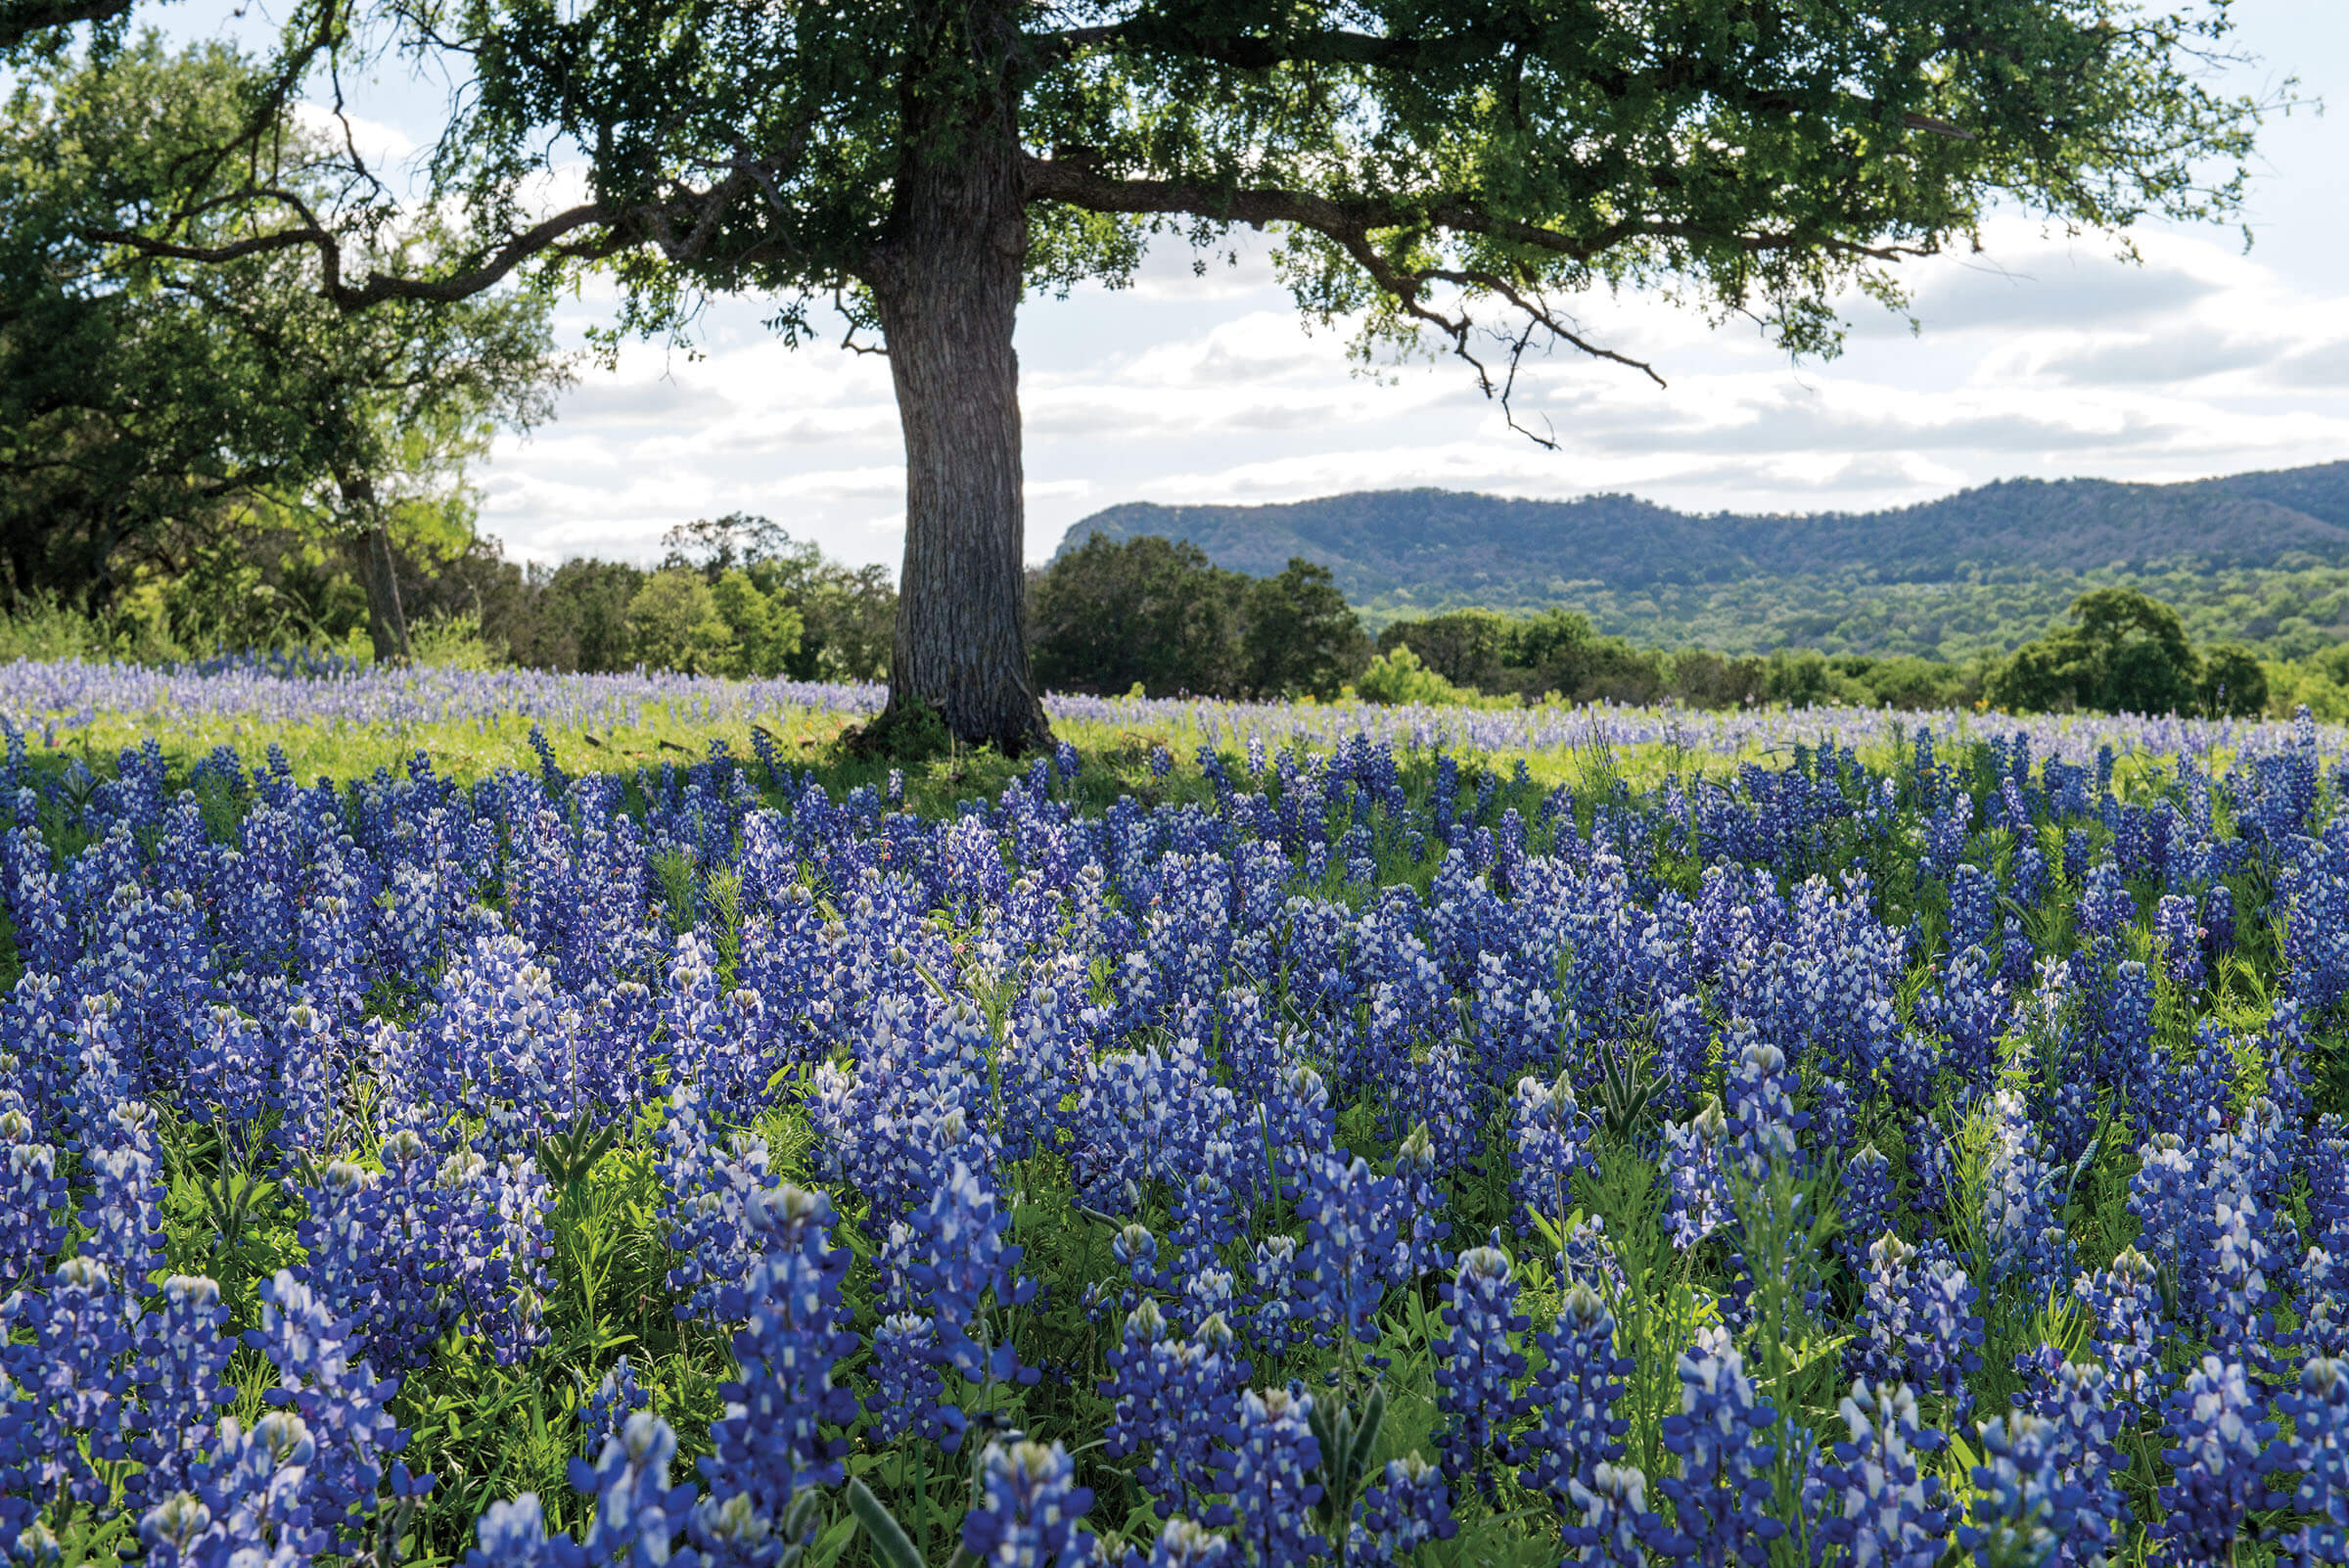 Bluebonnets in the Highland Lakes region